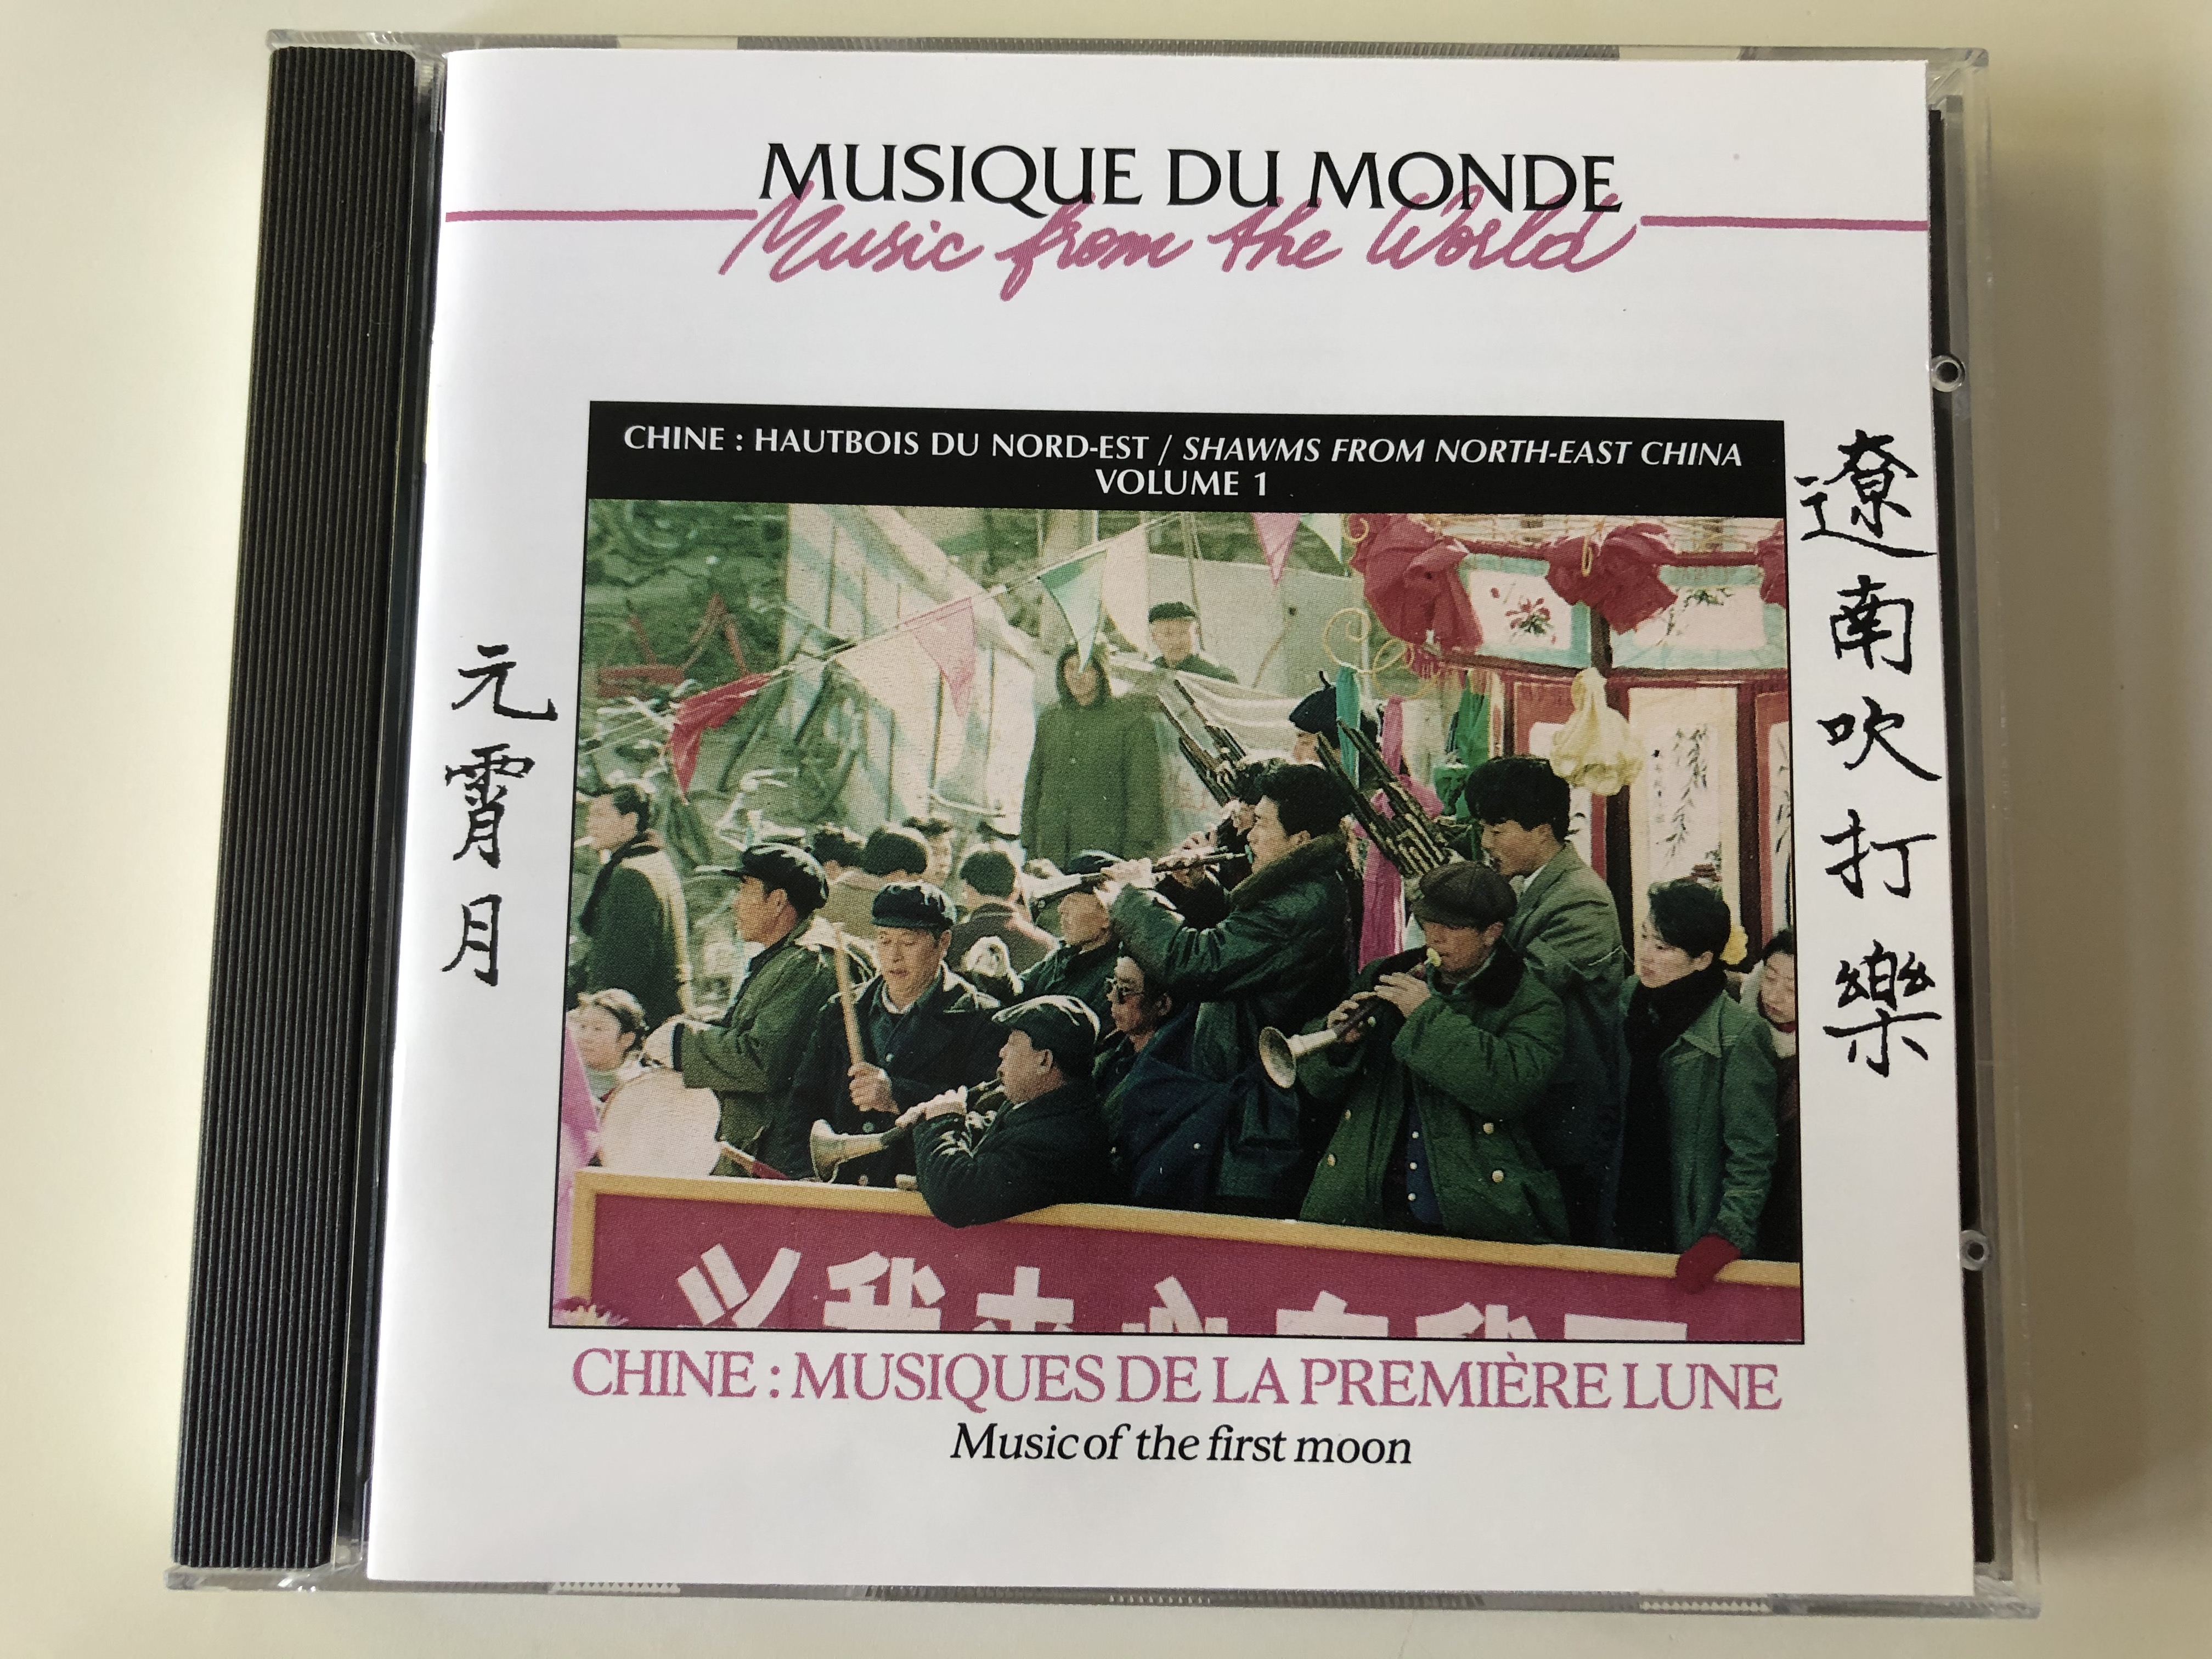 musique-du-monde-music-from-the-world-chine-hautbois-du-nord-est-shawms-from-north-east-china-volume-1-chine-musiques-de-la-premiere-lune-music-of-the-first-moon-buda-records-audio-cd.jpg